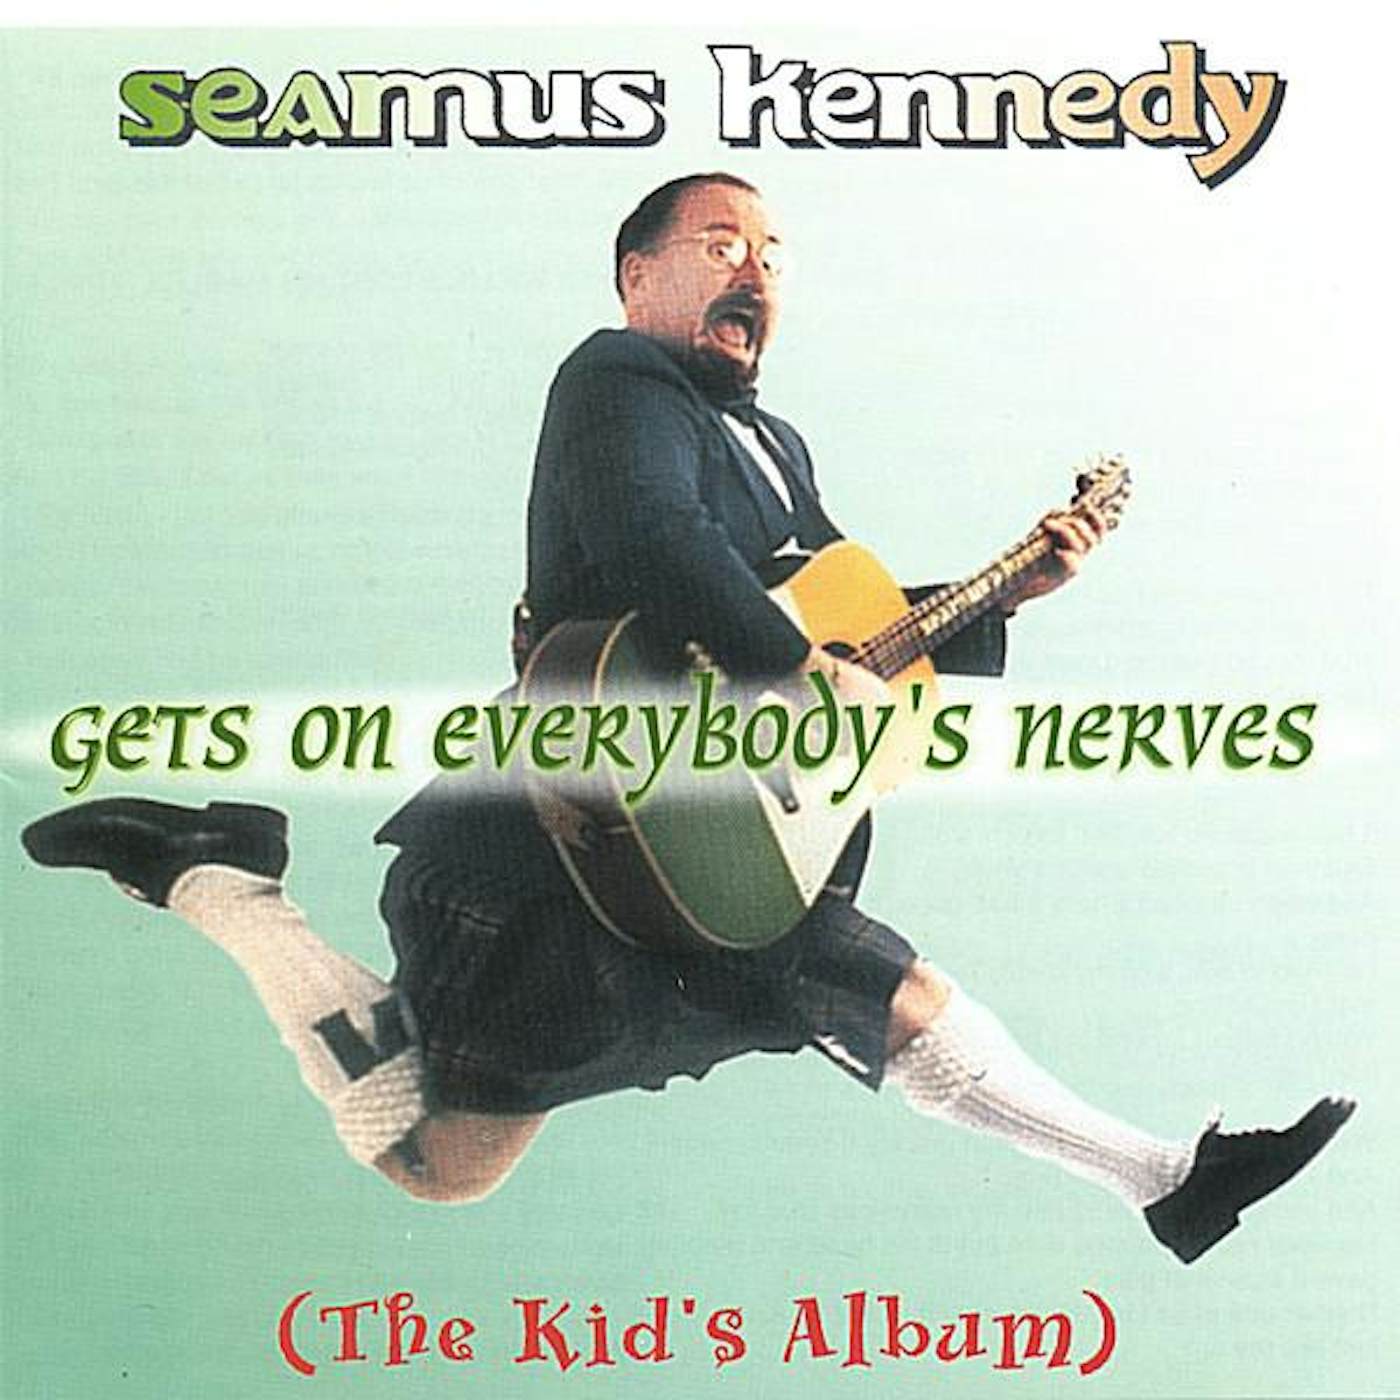 Seamus Kennedy GETS ON EVERYBODY'S NERVES CD